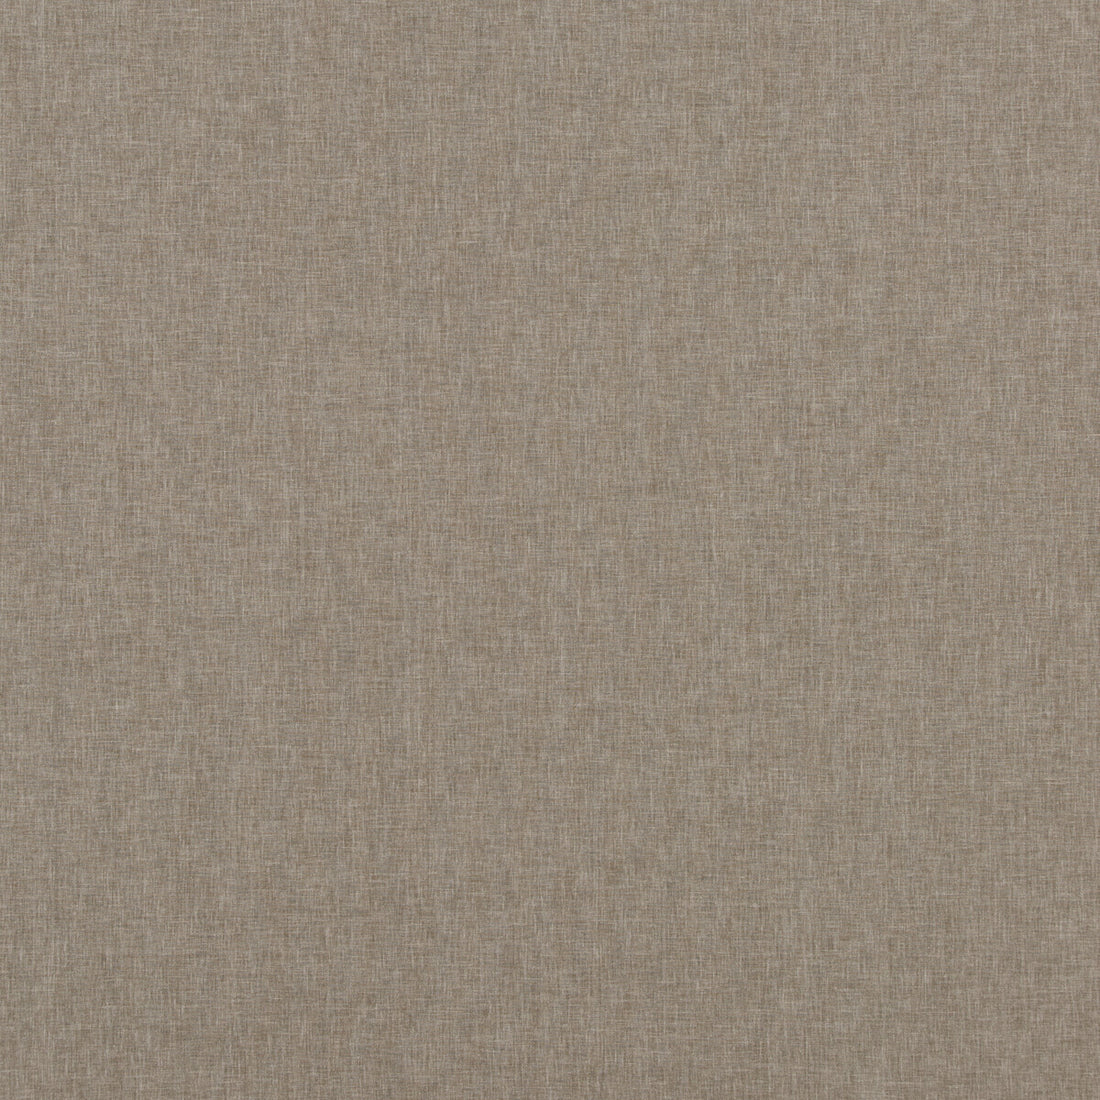 Carnival Plain fabric in shingle color - pattern PF50420.915.0 - by Baker Lifestyle in the Carnival collection